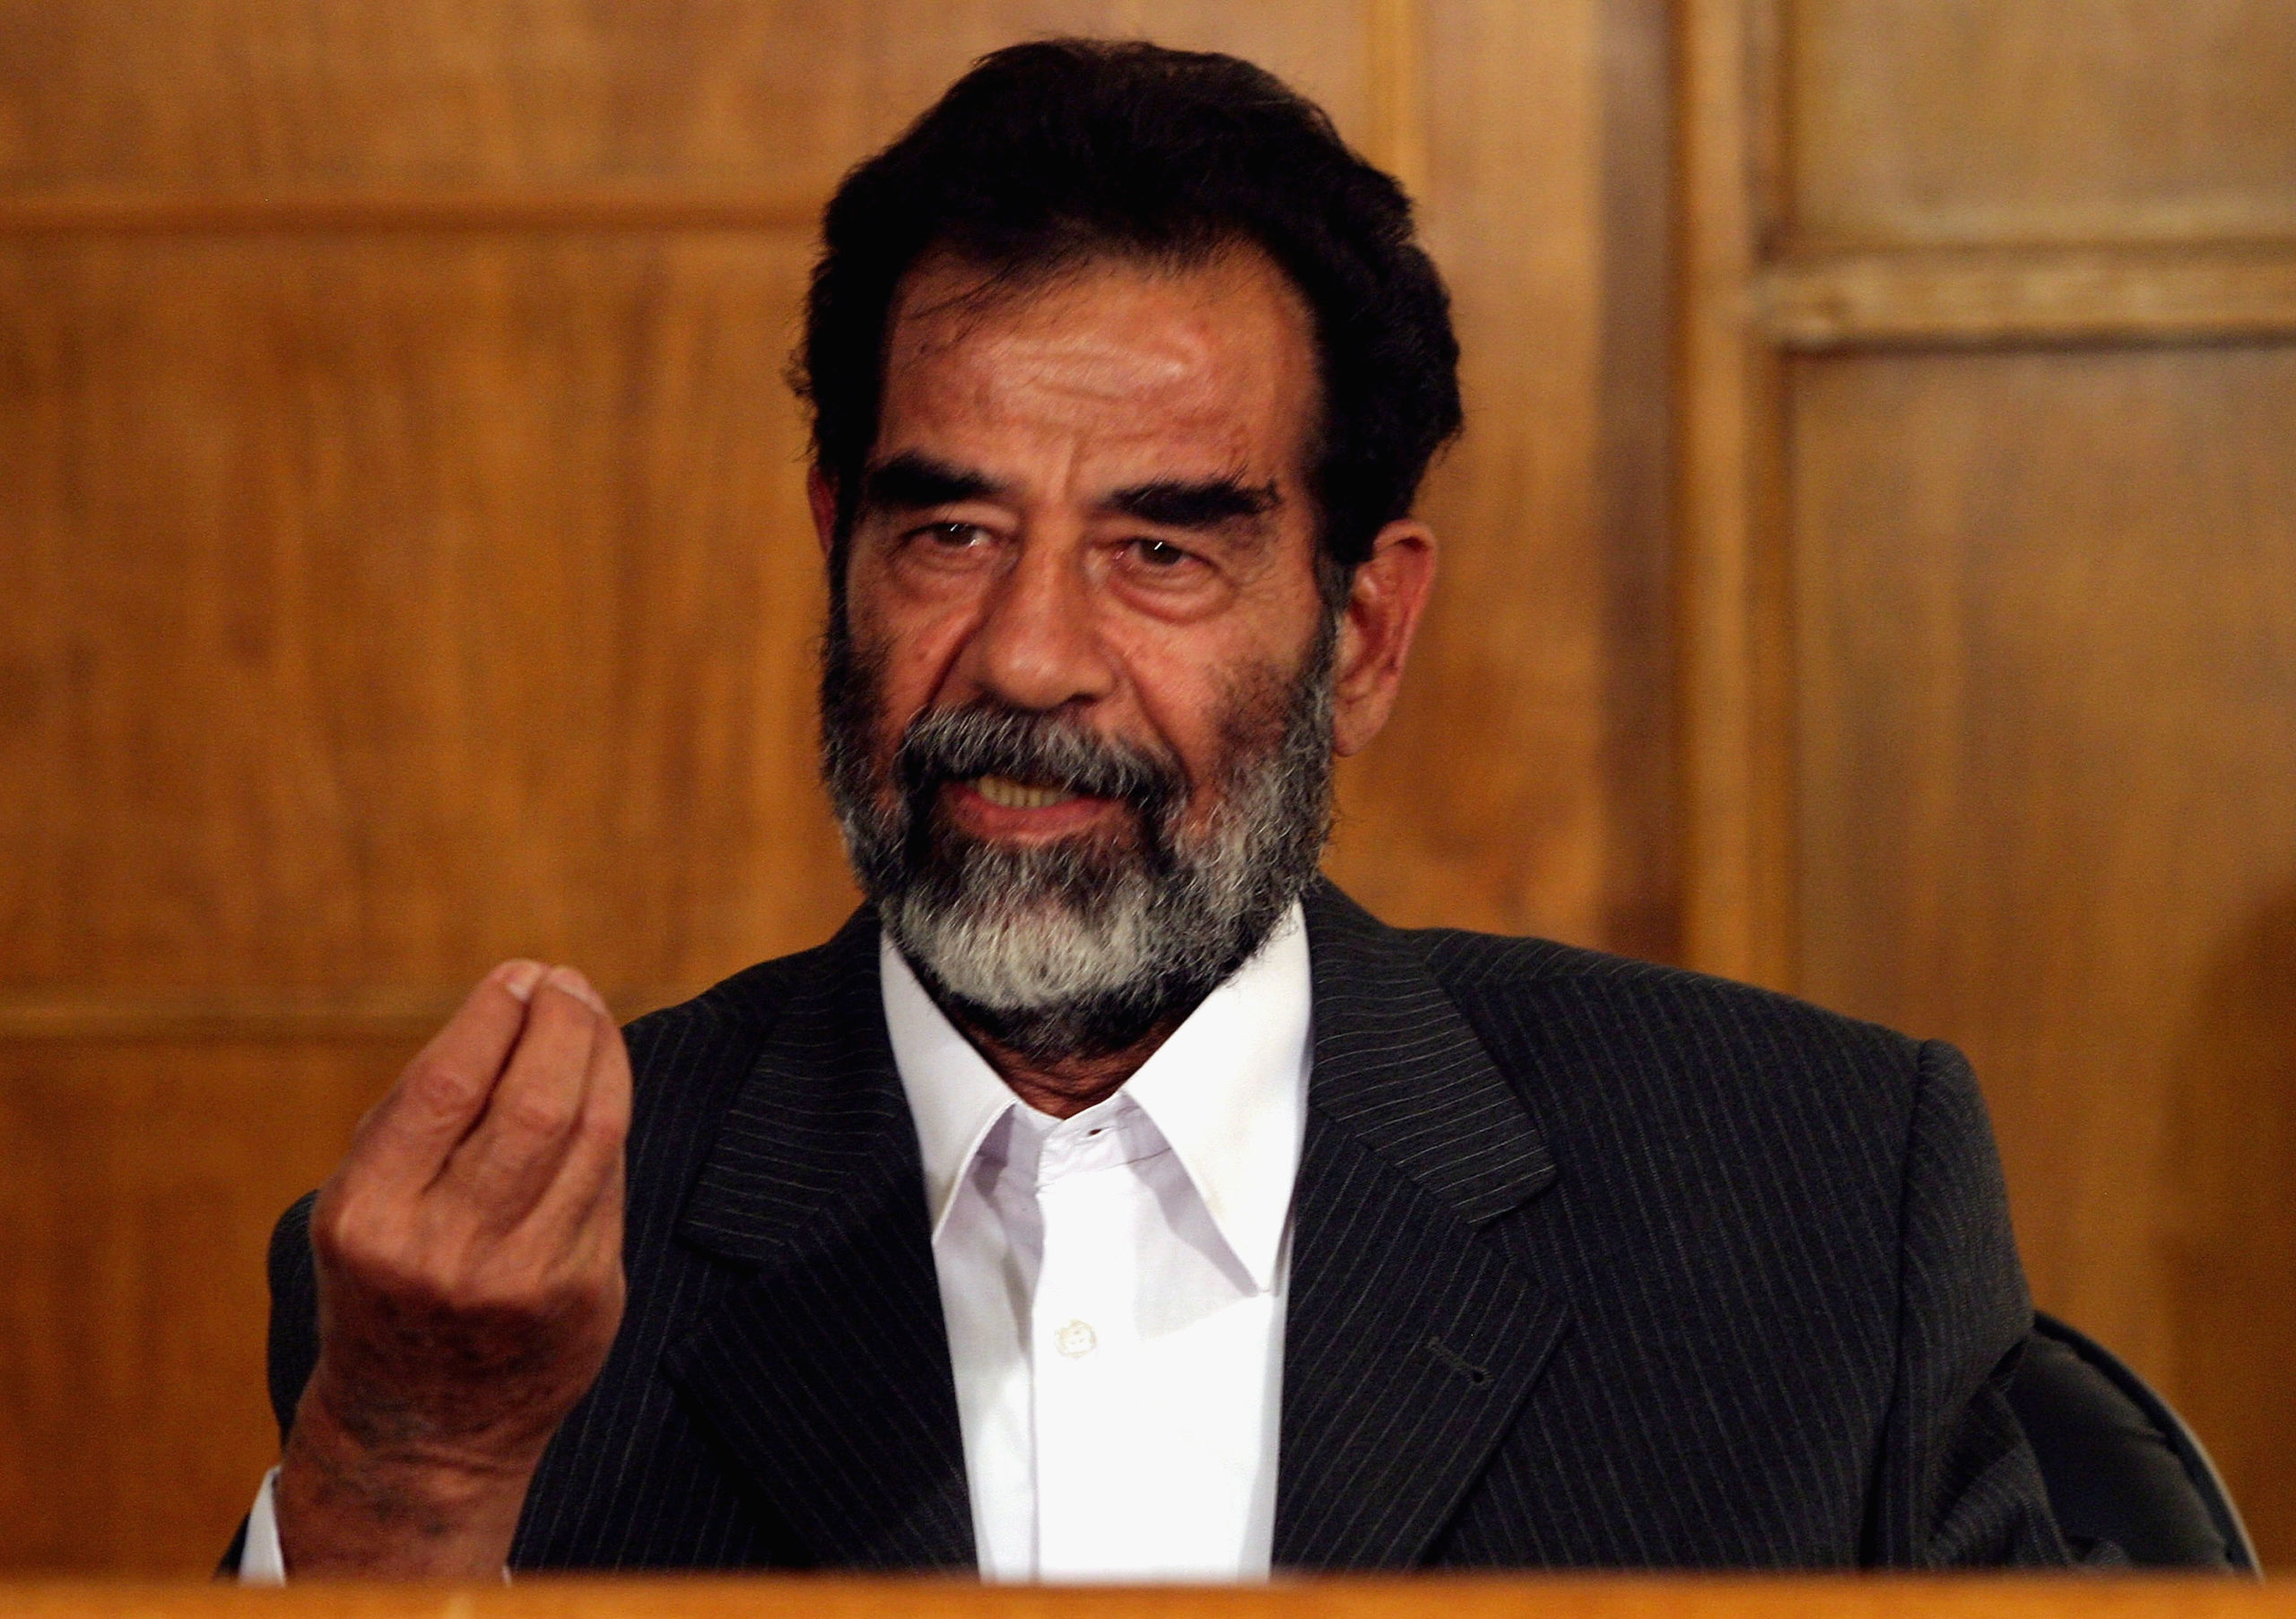 BAGHDAD, IRAQ - JULY 1: Former Iraqi President Saddam Hussein gestures as he responds to a as a list of charges that he and 11 other high level defendents are facing in an Iraqi courtroom July 1, 2004 in Baghdad, Iraq. Hussein was transferred into the legal custody of Iraqi authorities on June 30, 2004 but remains in the physical custody of the U.S. Military at an undisclosed location. Hussein is not expected to face trial in an Iraqi court for at least several months. (Photo by Karen Ballard/Pool - Getty Images)